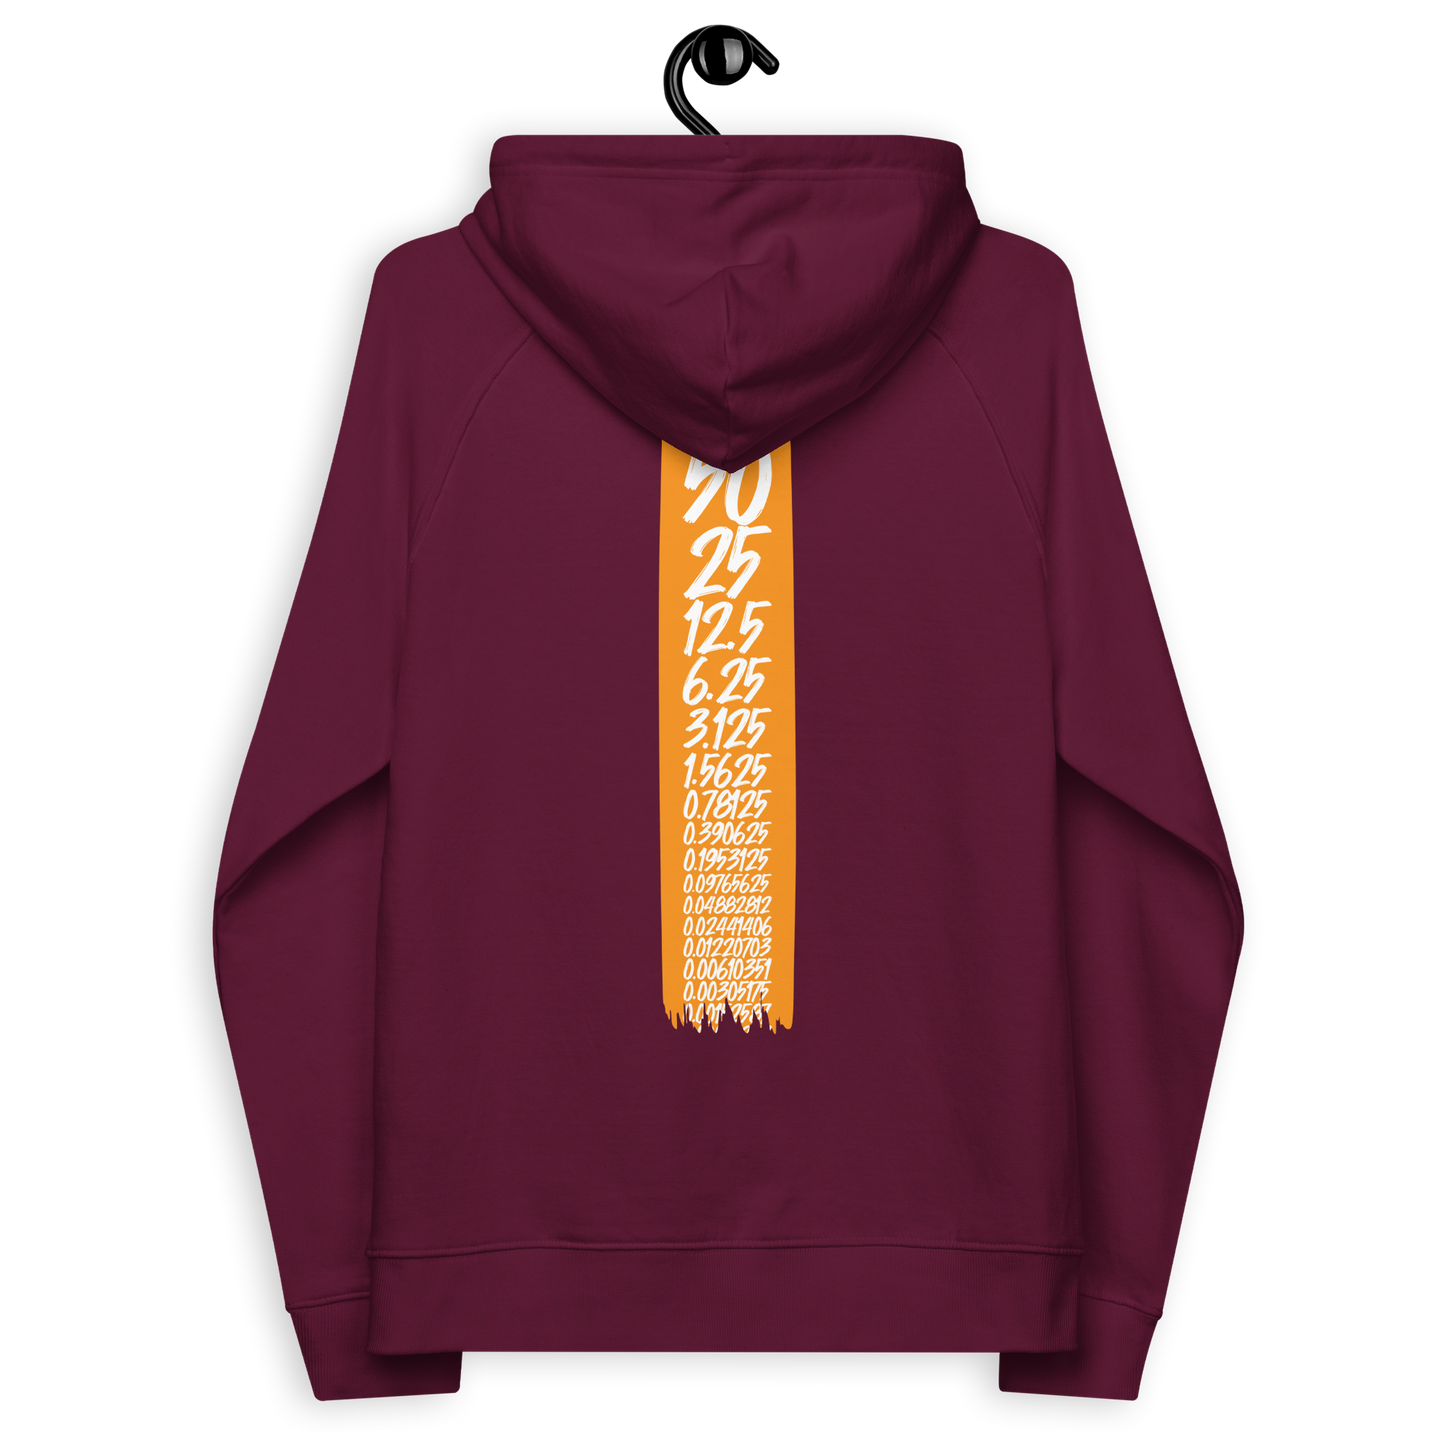 Back view of a burgundy bitcoin hoodie.